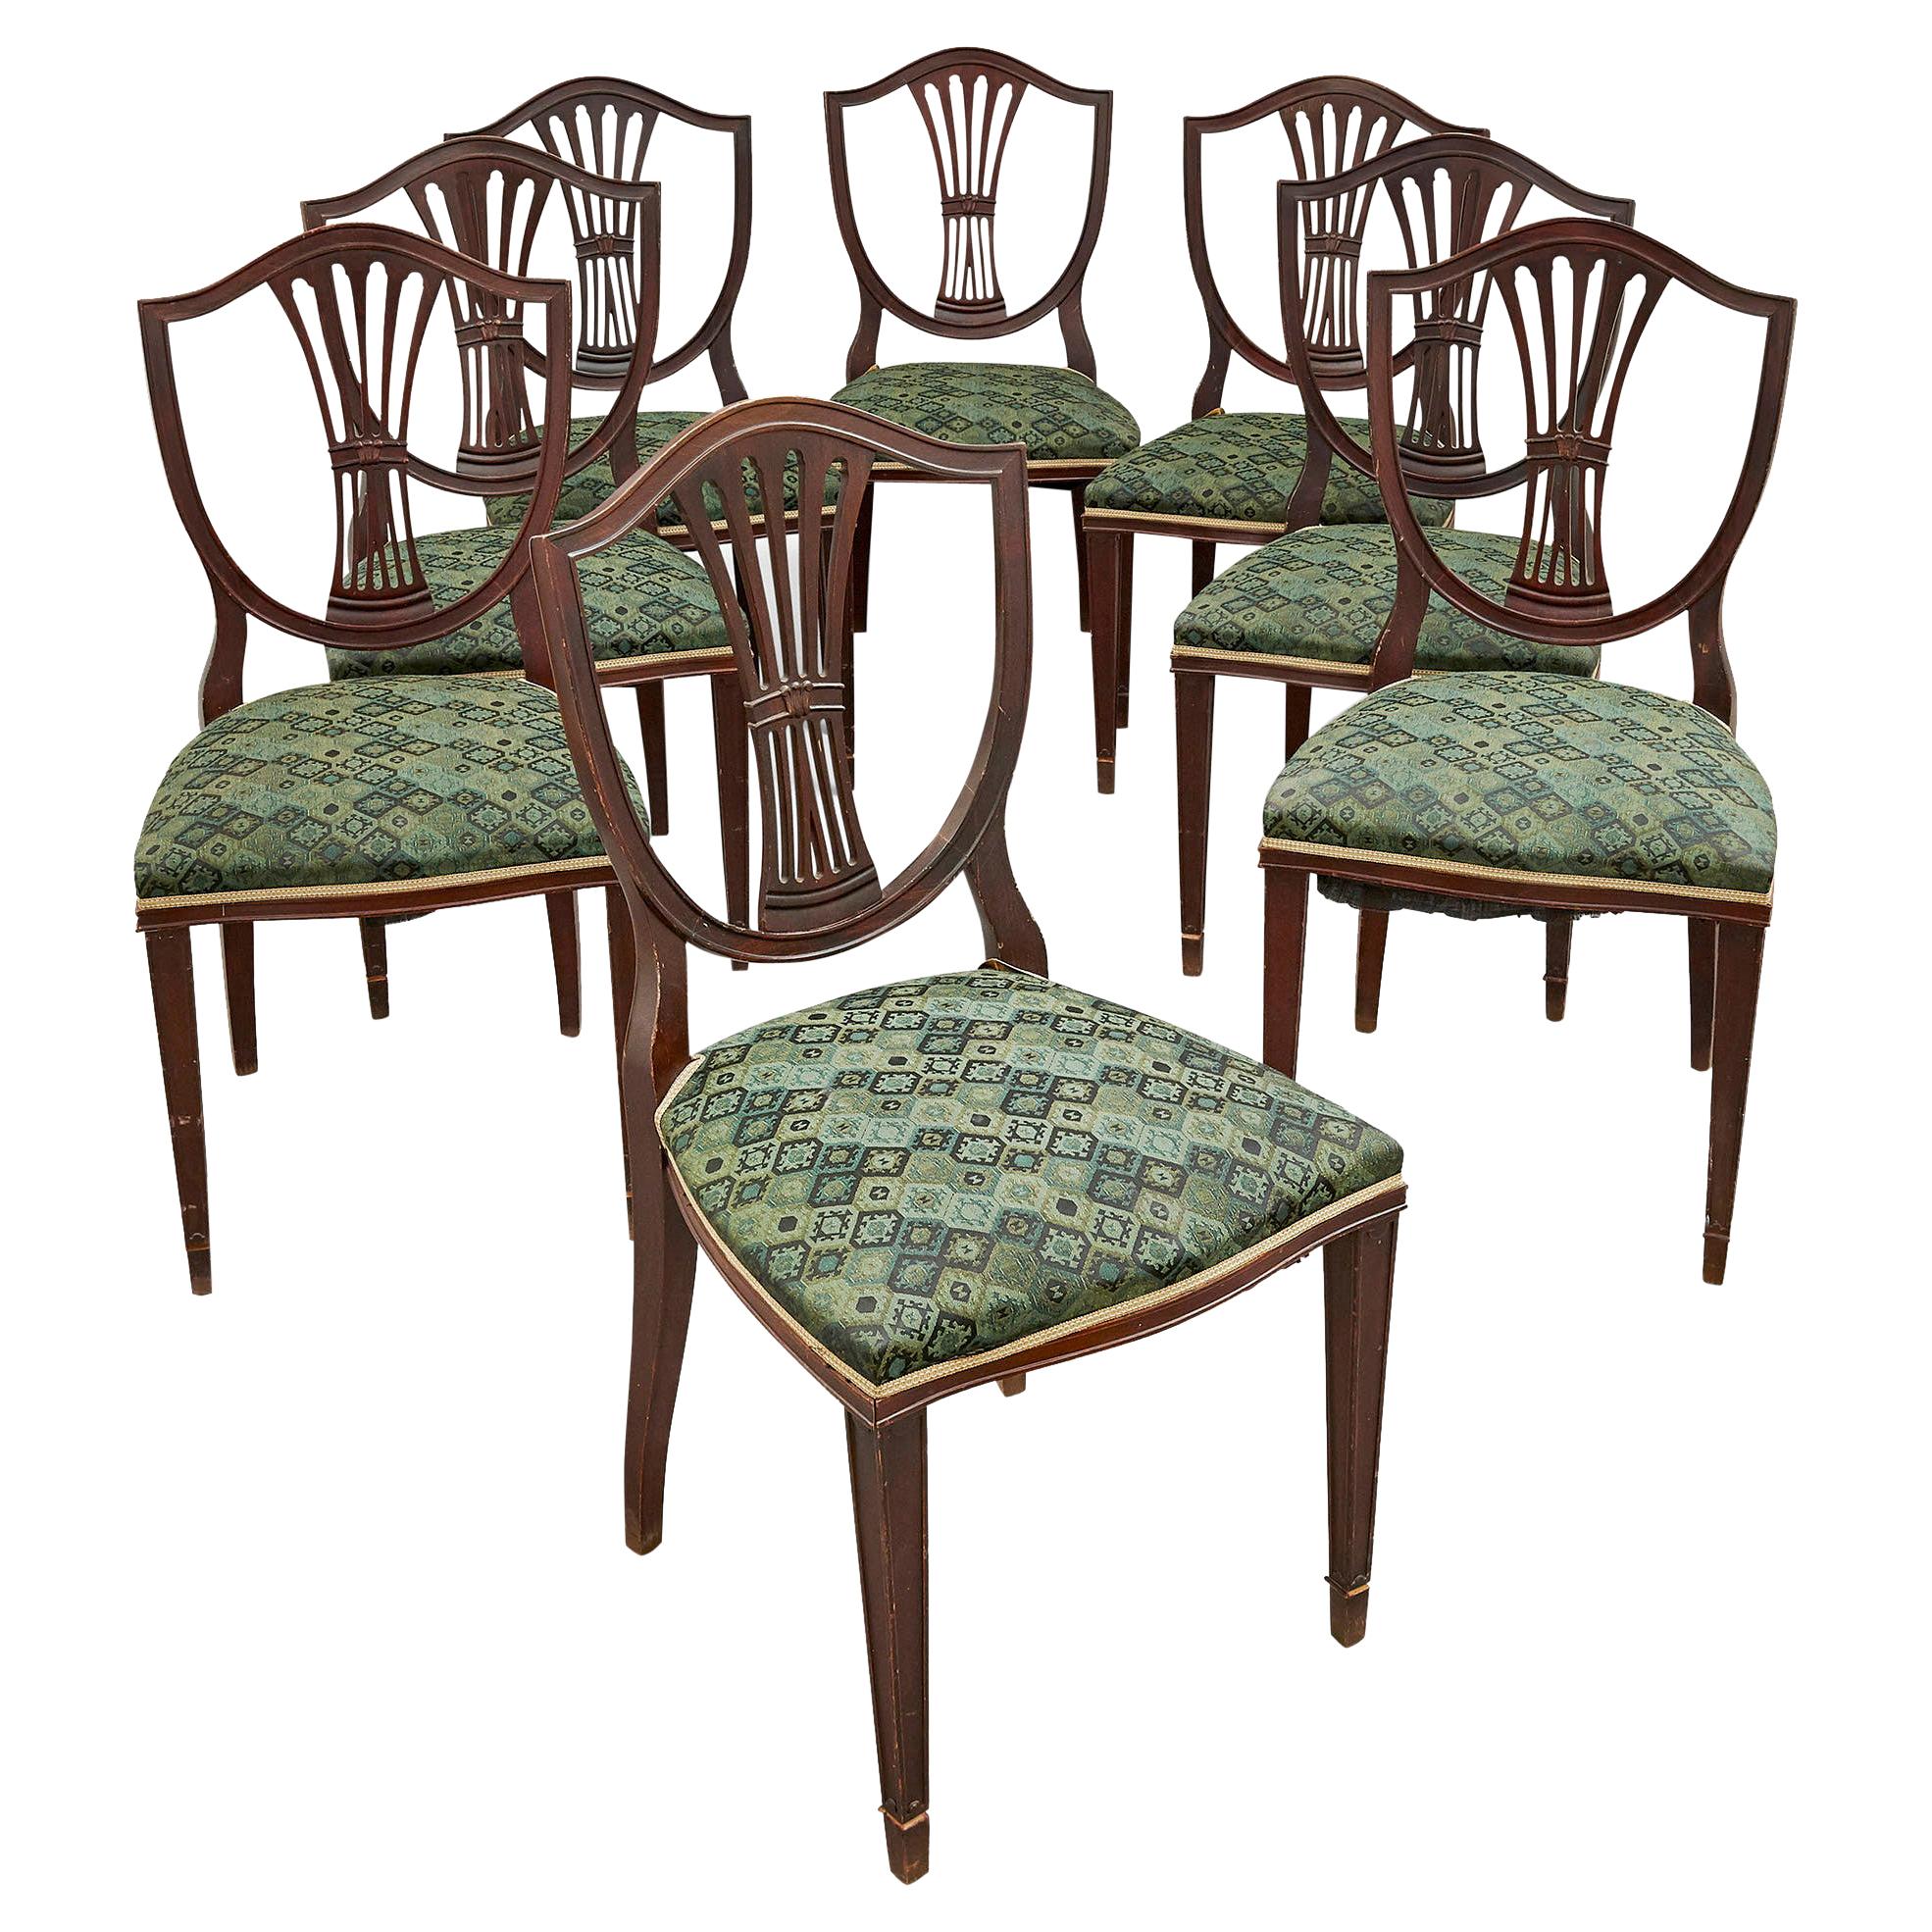 Set of Eight Upholstered Dining Chairs from Edwardian Period